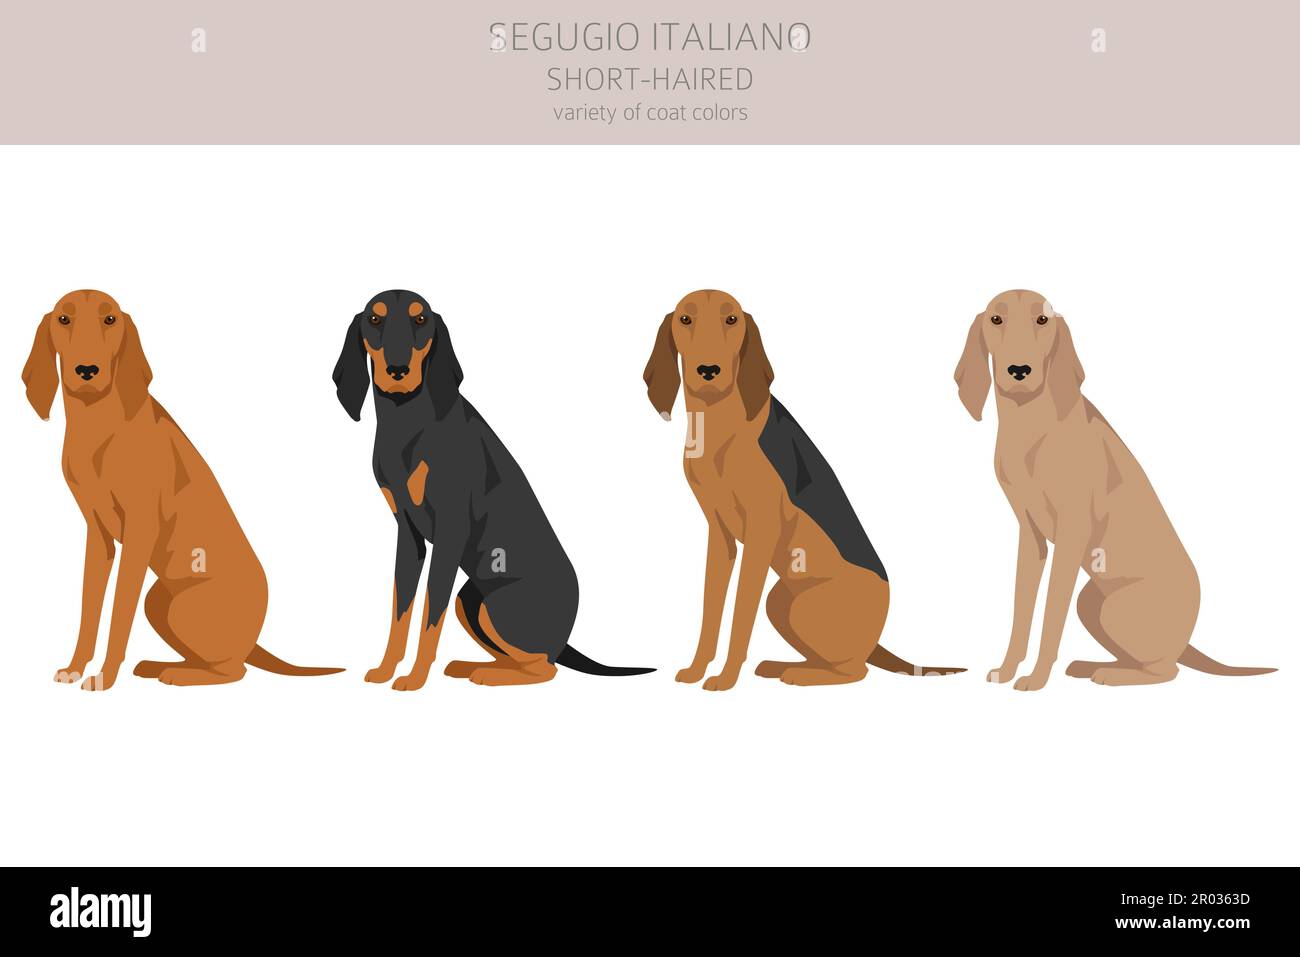 Segugio Italiano short haired clipart. Different poses, coat colors set.  Vector illustration Stock Vector